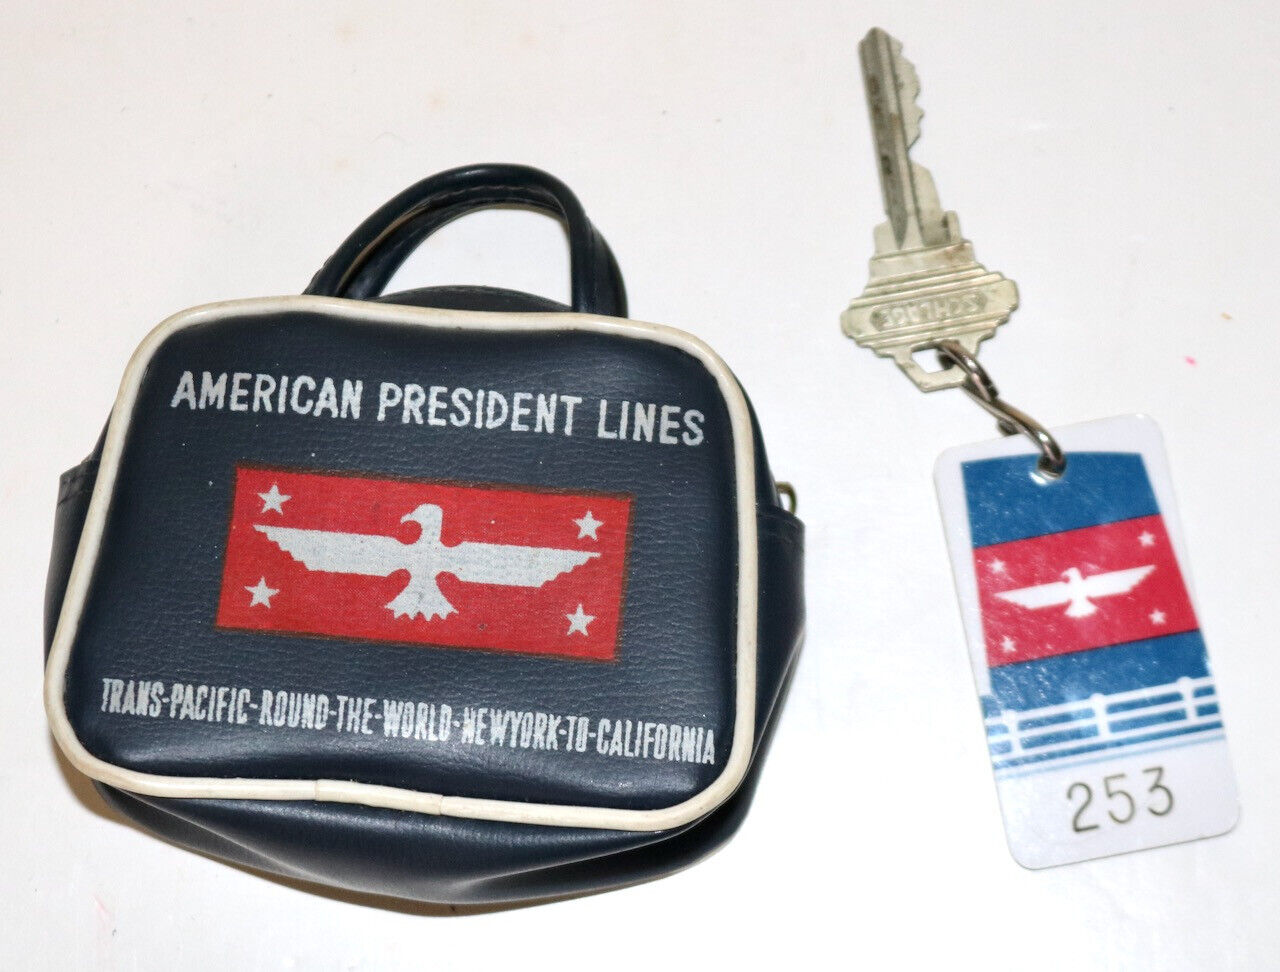 AMERICAN PRESIDENT LINES vintage miniature travel tote bag with key fob